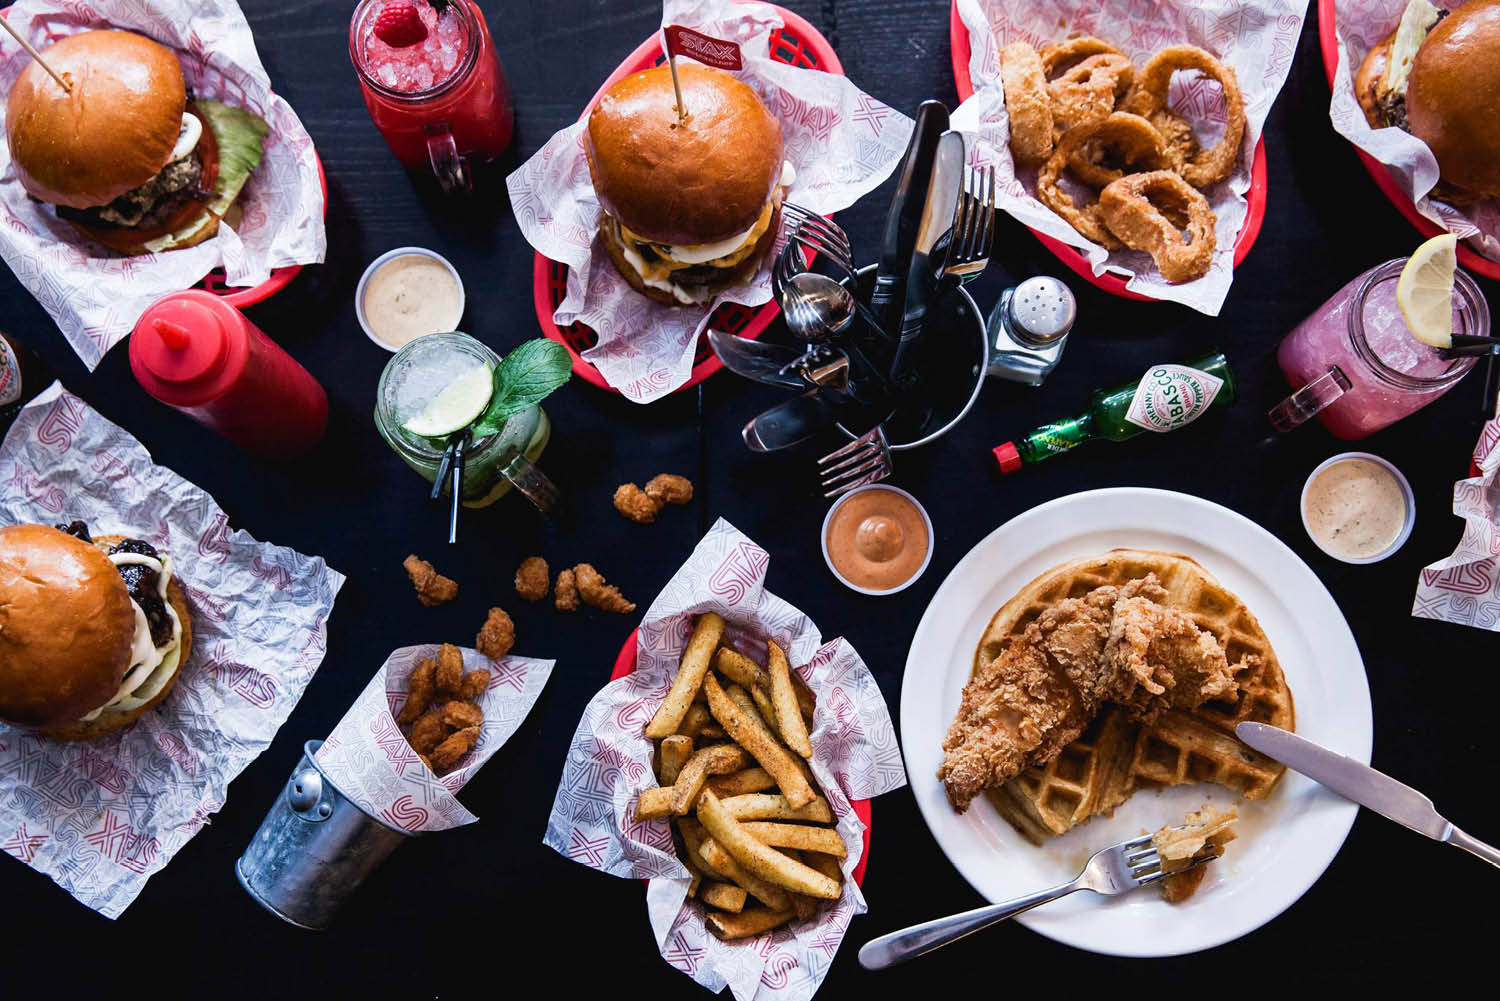 The four best American food joints in London